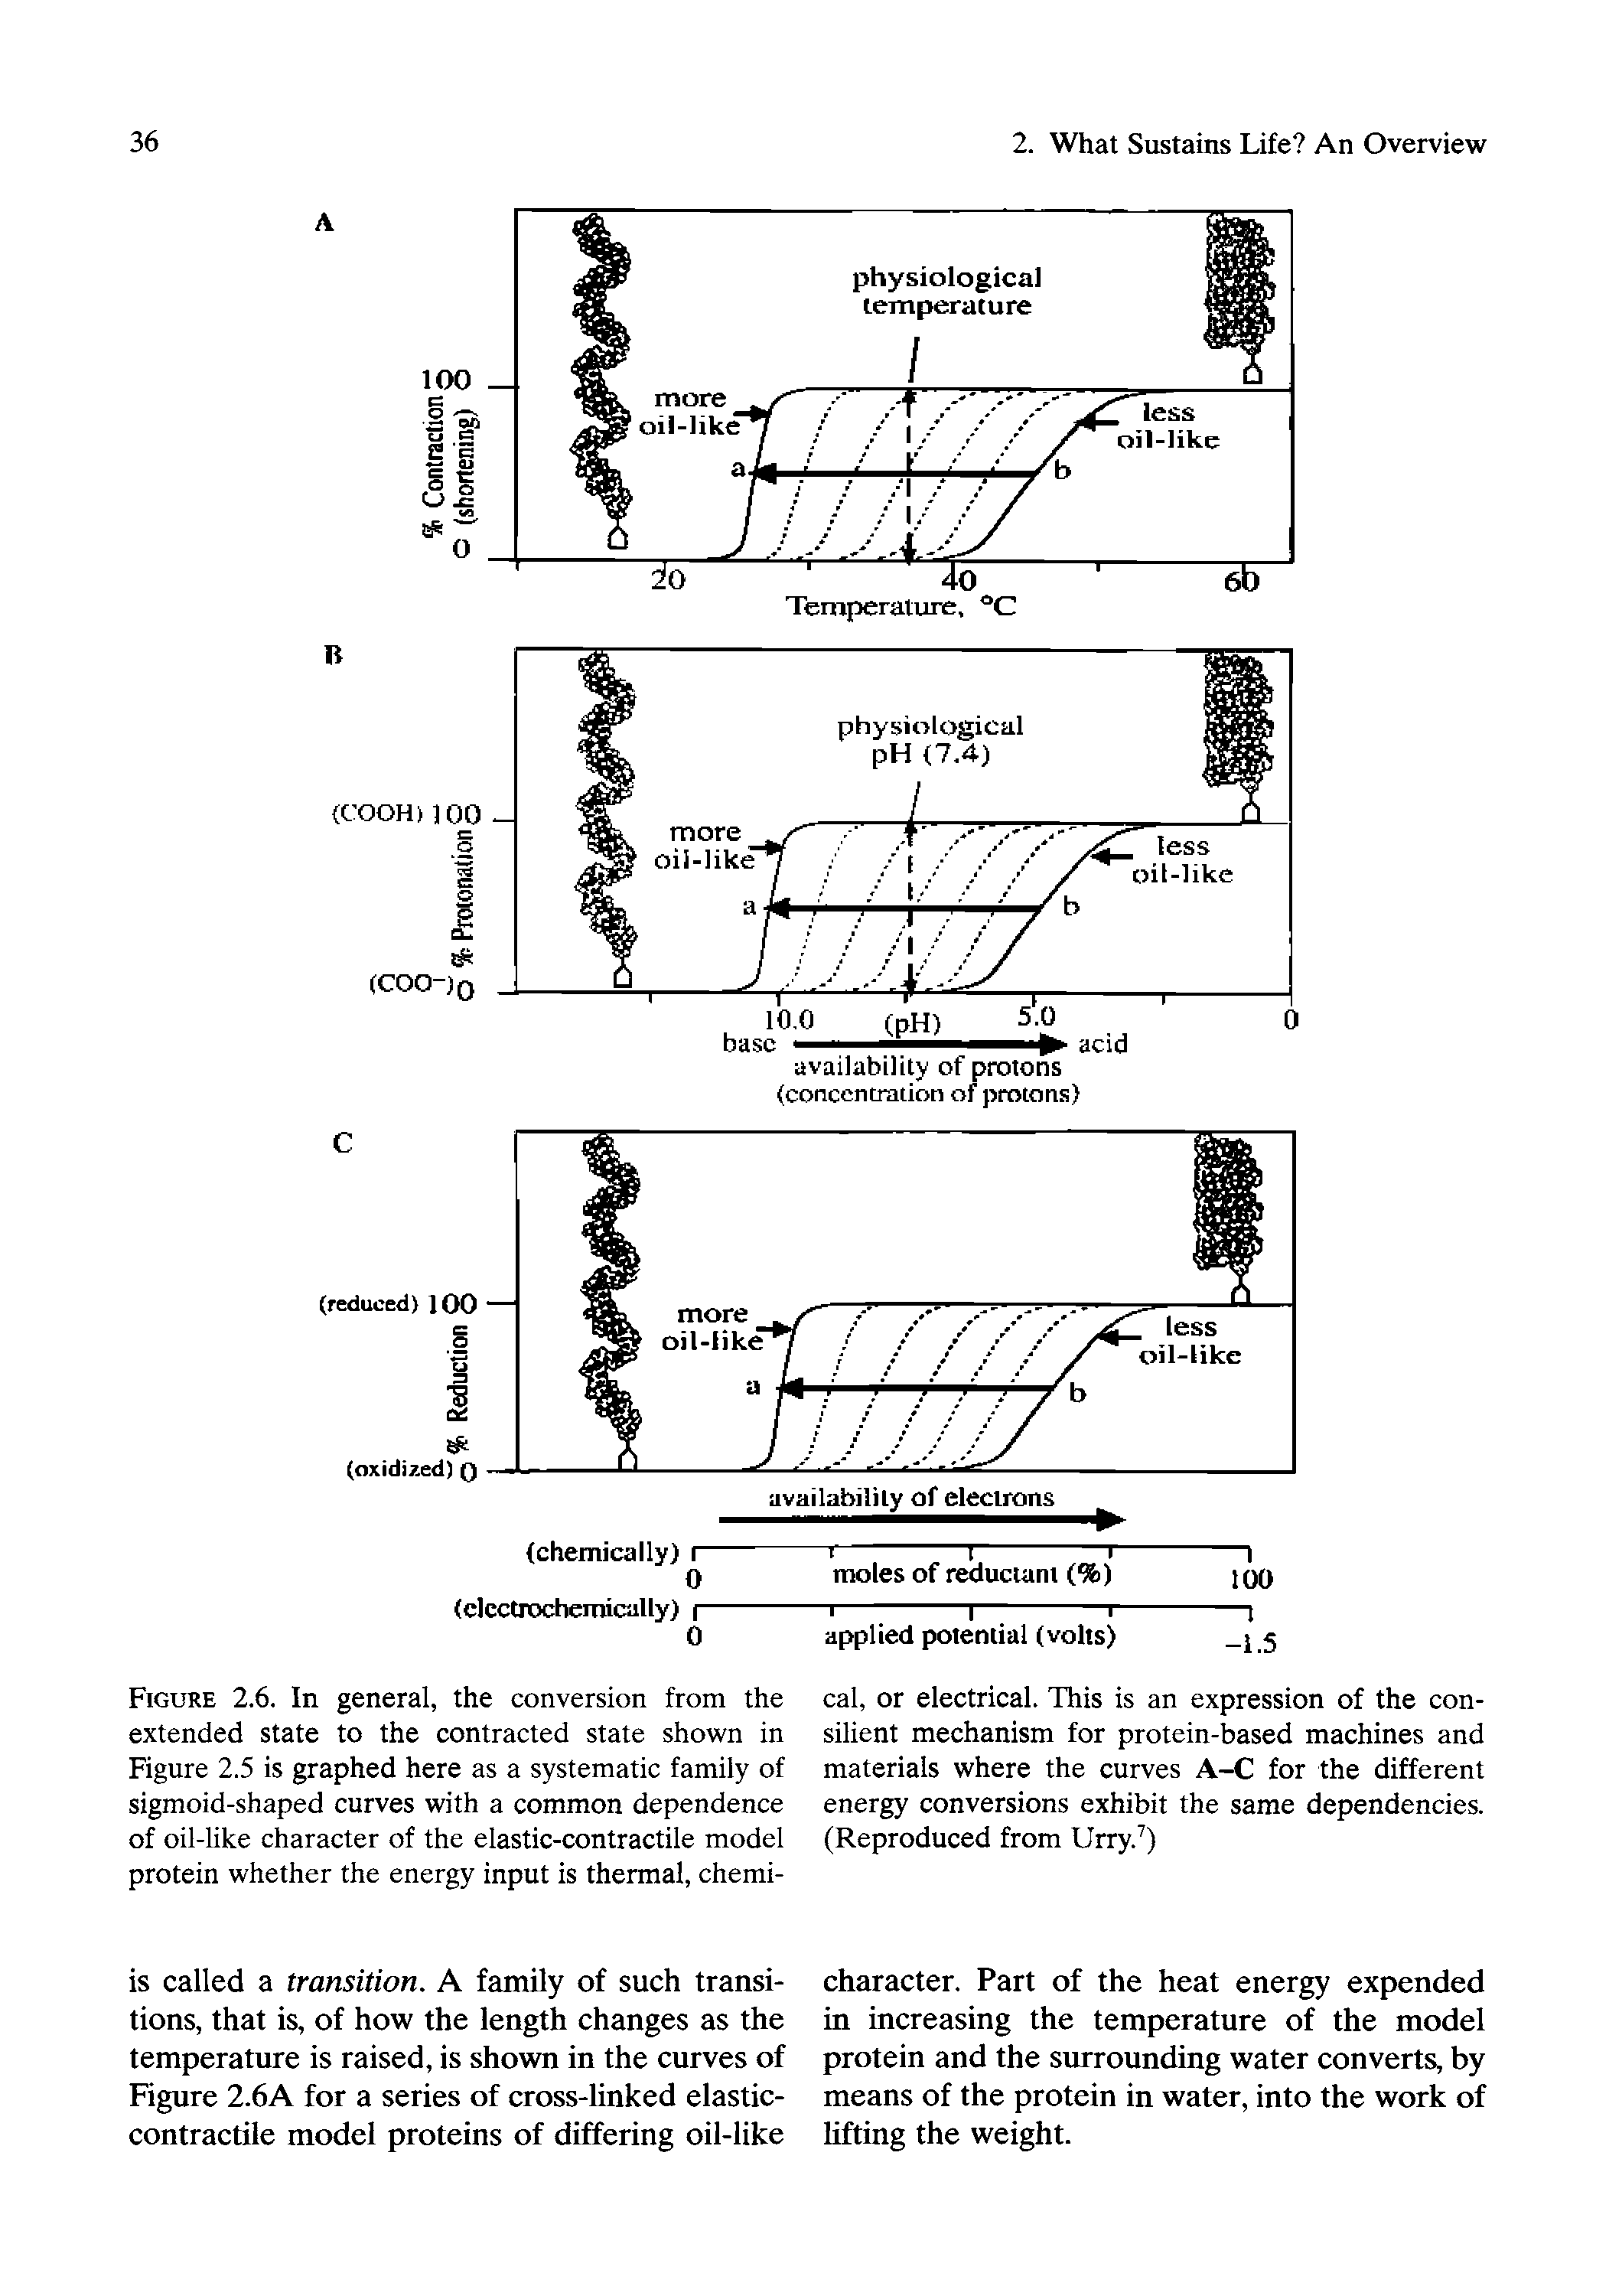 Figure 2.6. In general, the conversion from the extended state to the contracted state shown in Figure 2.5 is graphed here as a systematic family of sigmoid-shaped curves with a common dependence of oil-like character of the elastic-contractile model protein whether the energy input is thermal, chemi-...